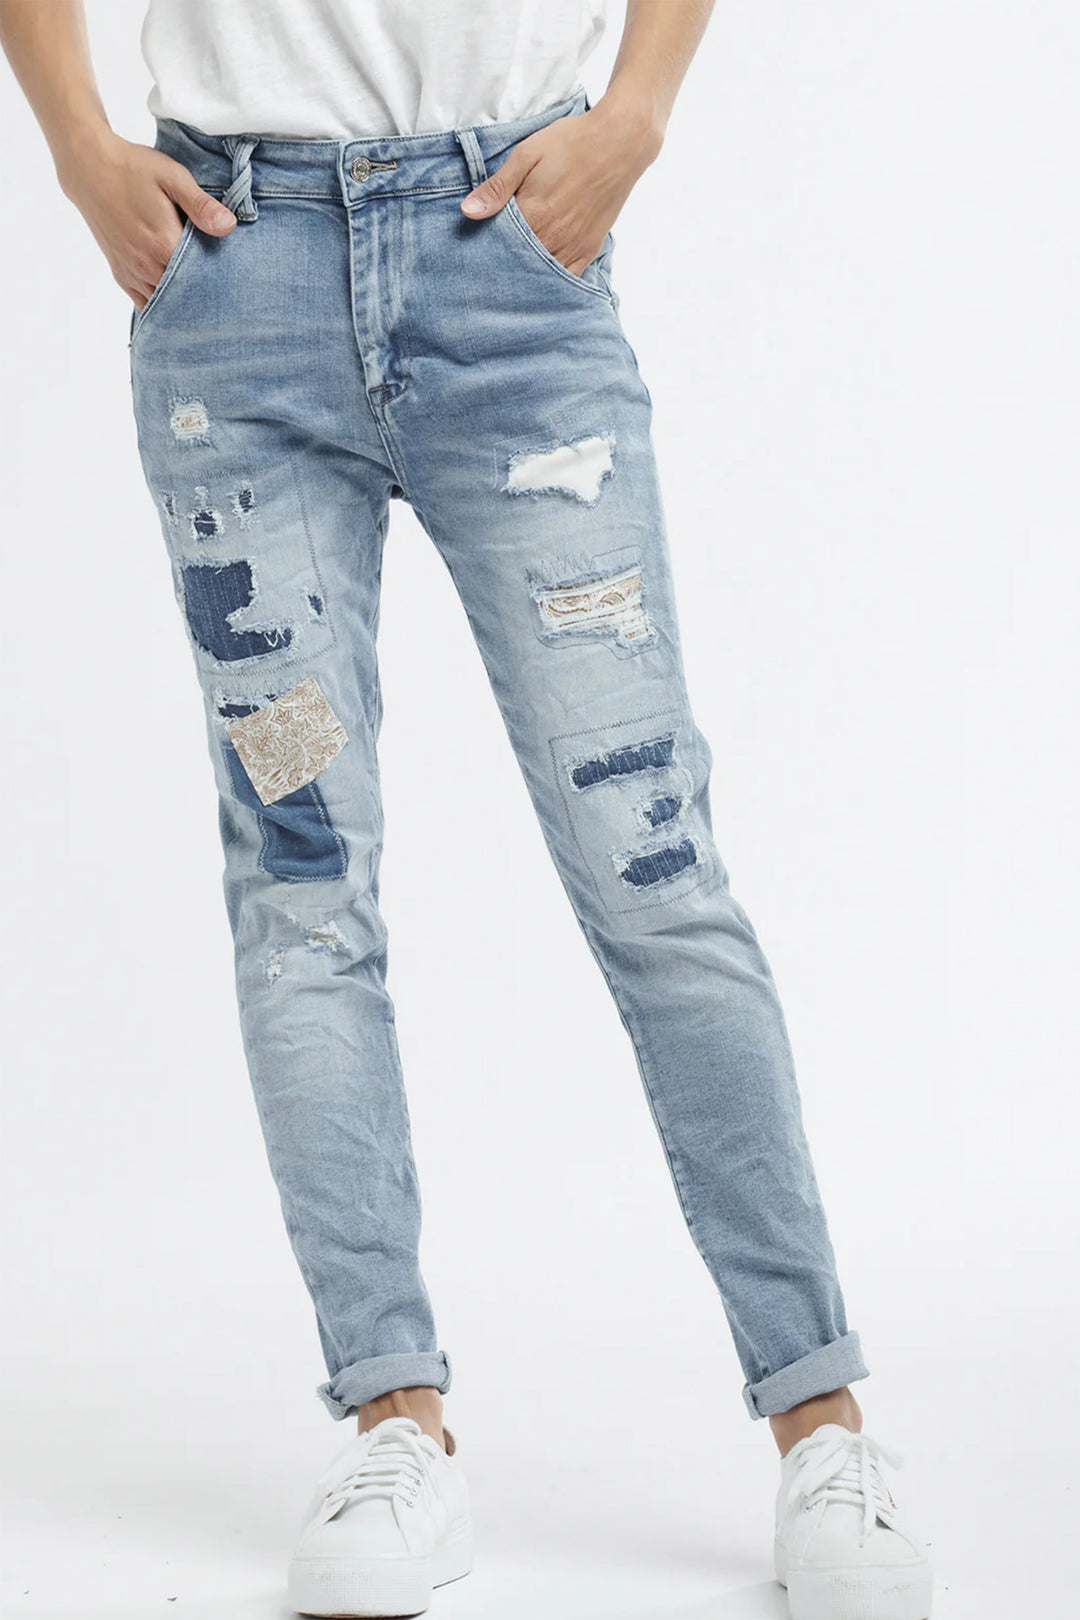 Brand Italian Star  Colour Light Washed Denim Patch Detail